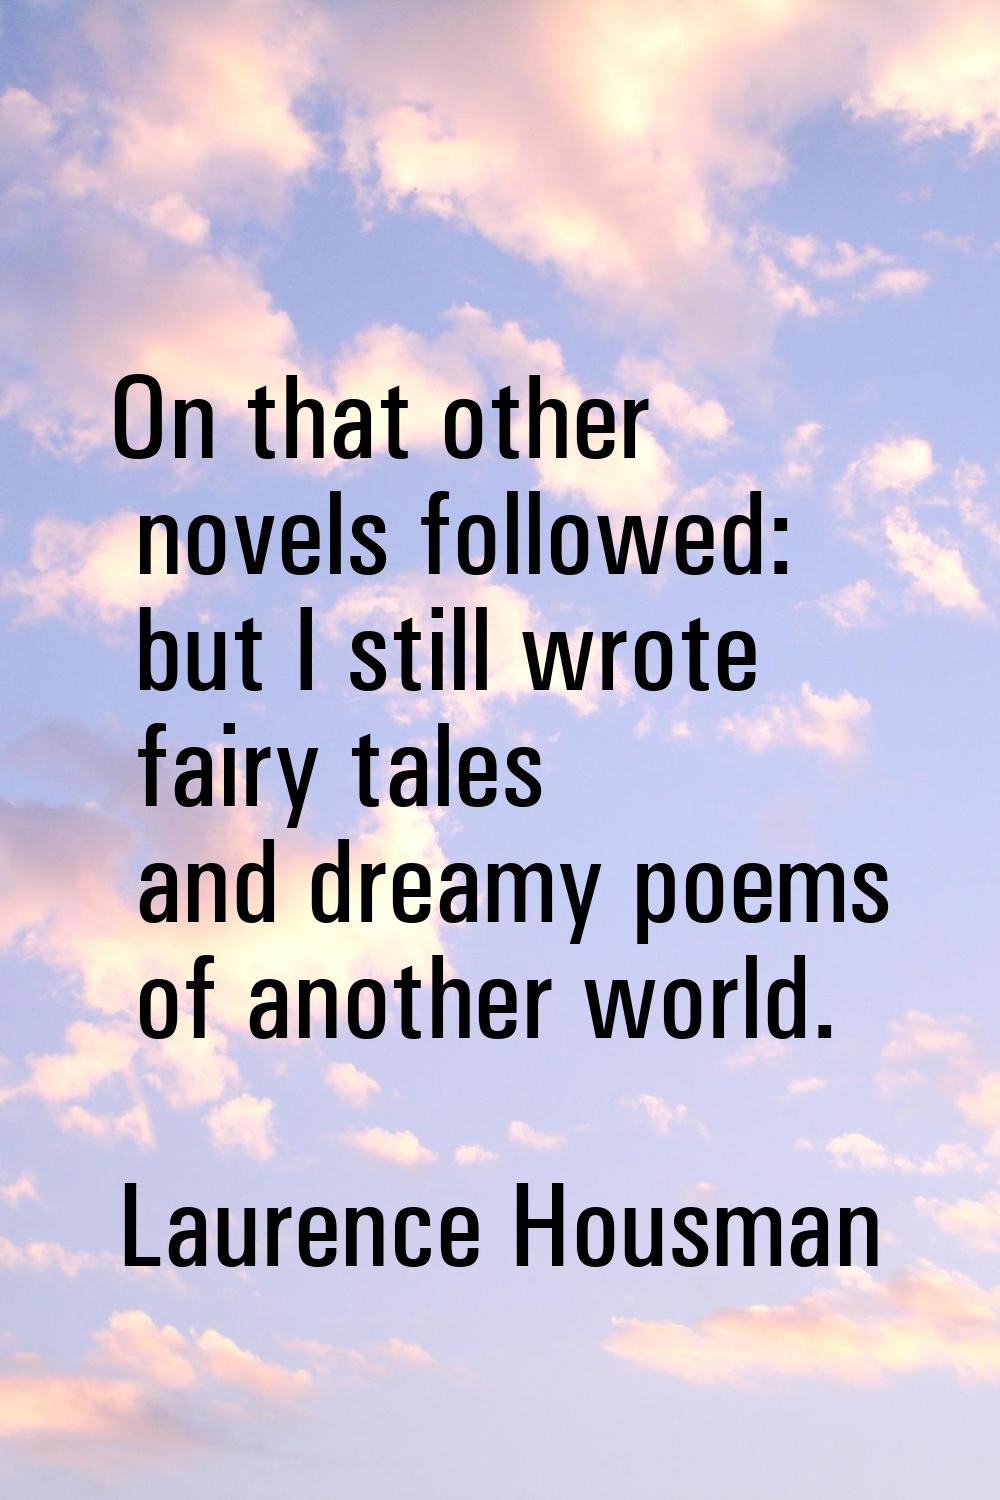 On that other novels followed: but I still wrote fairy tales and dreamy poems of another world.